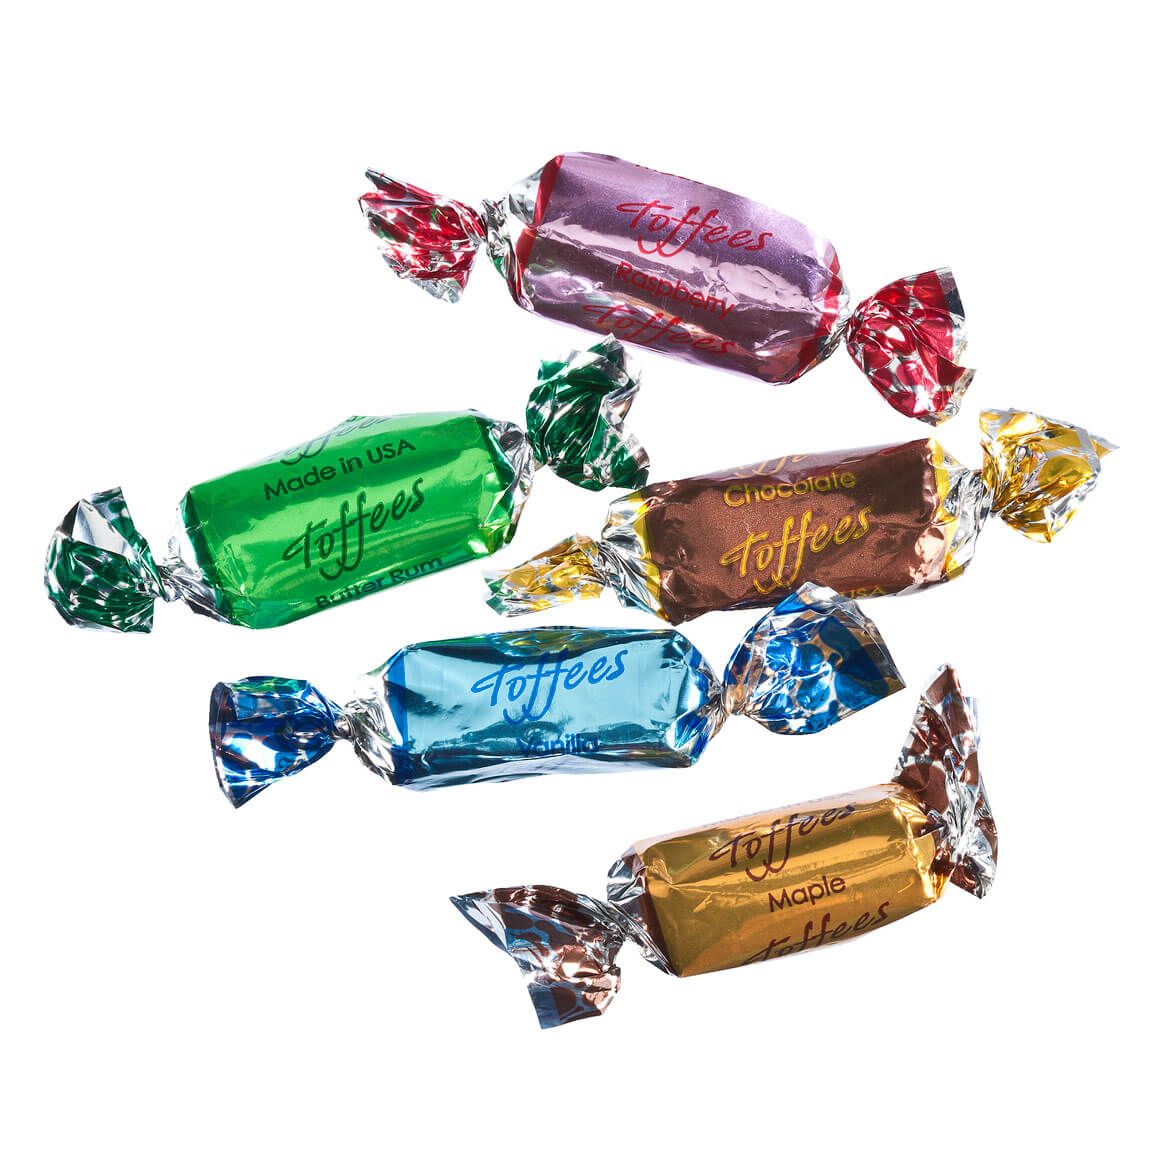 Toffee Assortment - Gourmet Toffee - Chewy Toffee - Miles Kimball